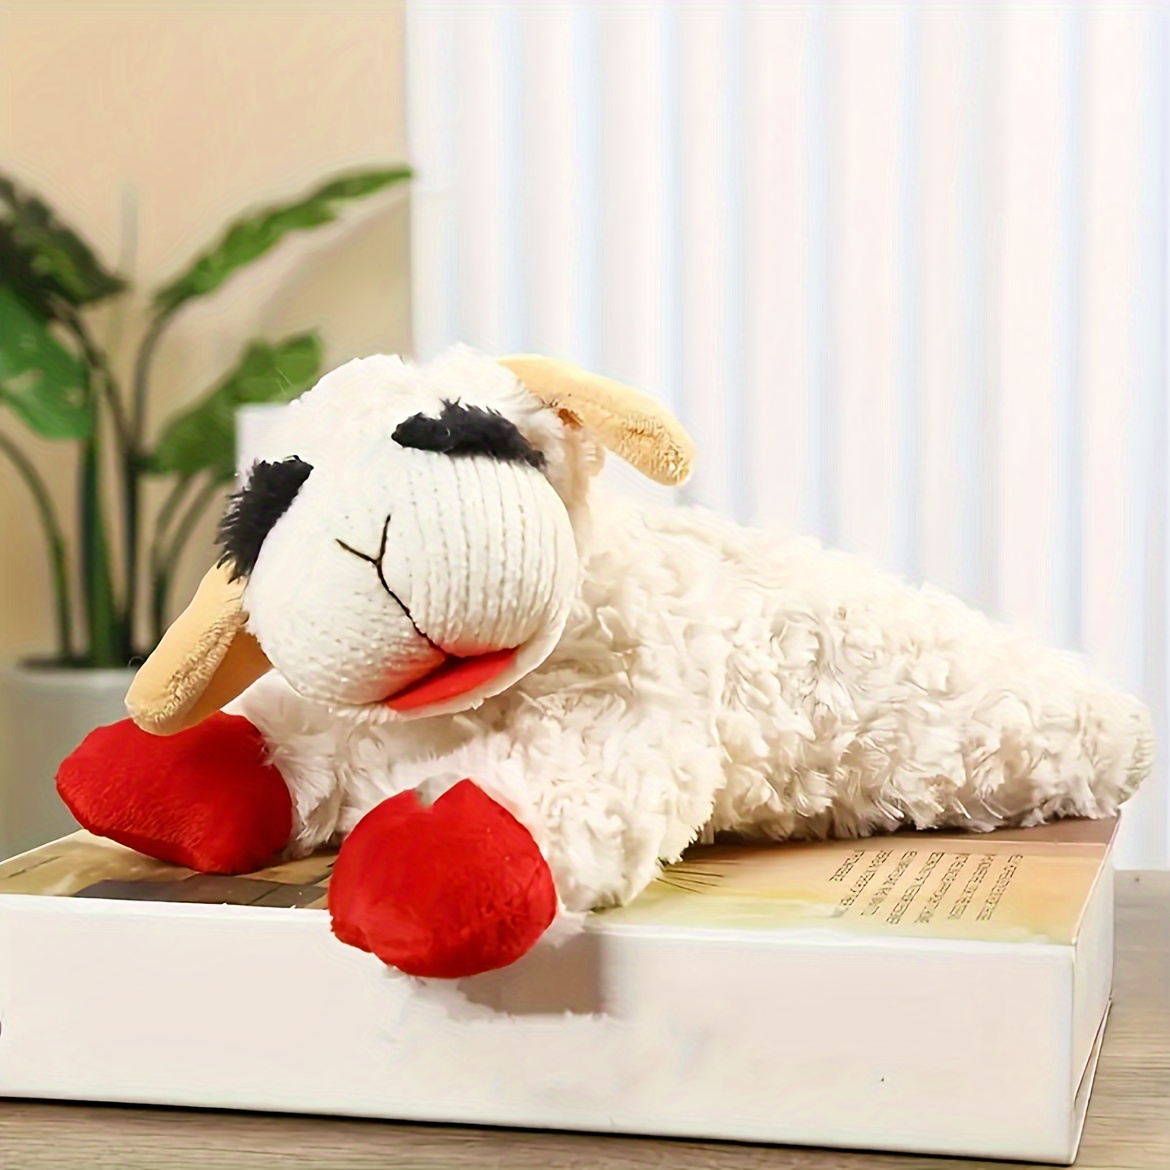 

1pc Plush Squeaky Lamb Dog Toy - No Battery Needed, All-breed Friendly, Durable Chew Squeaker Doll For Interactive Play And Entertainment